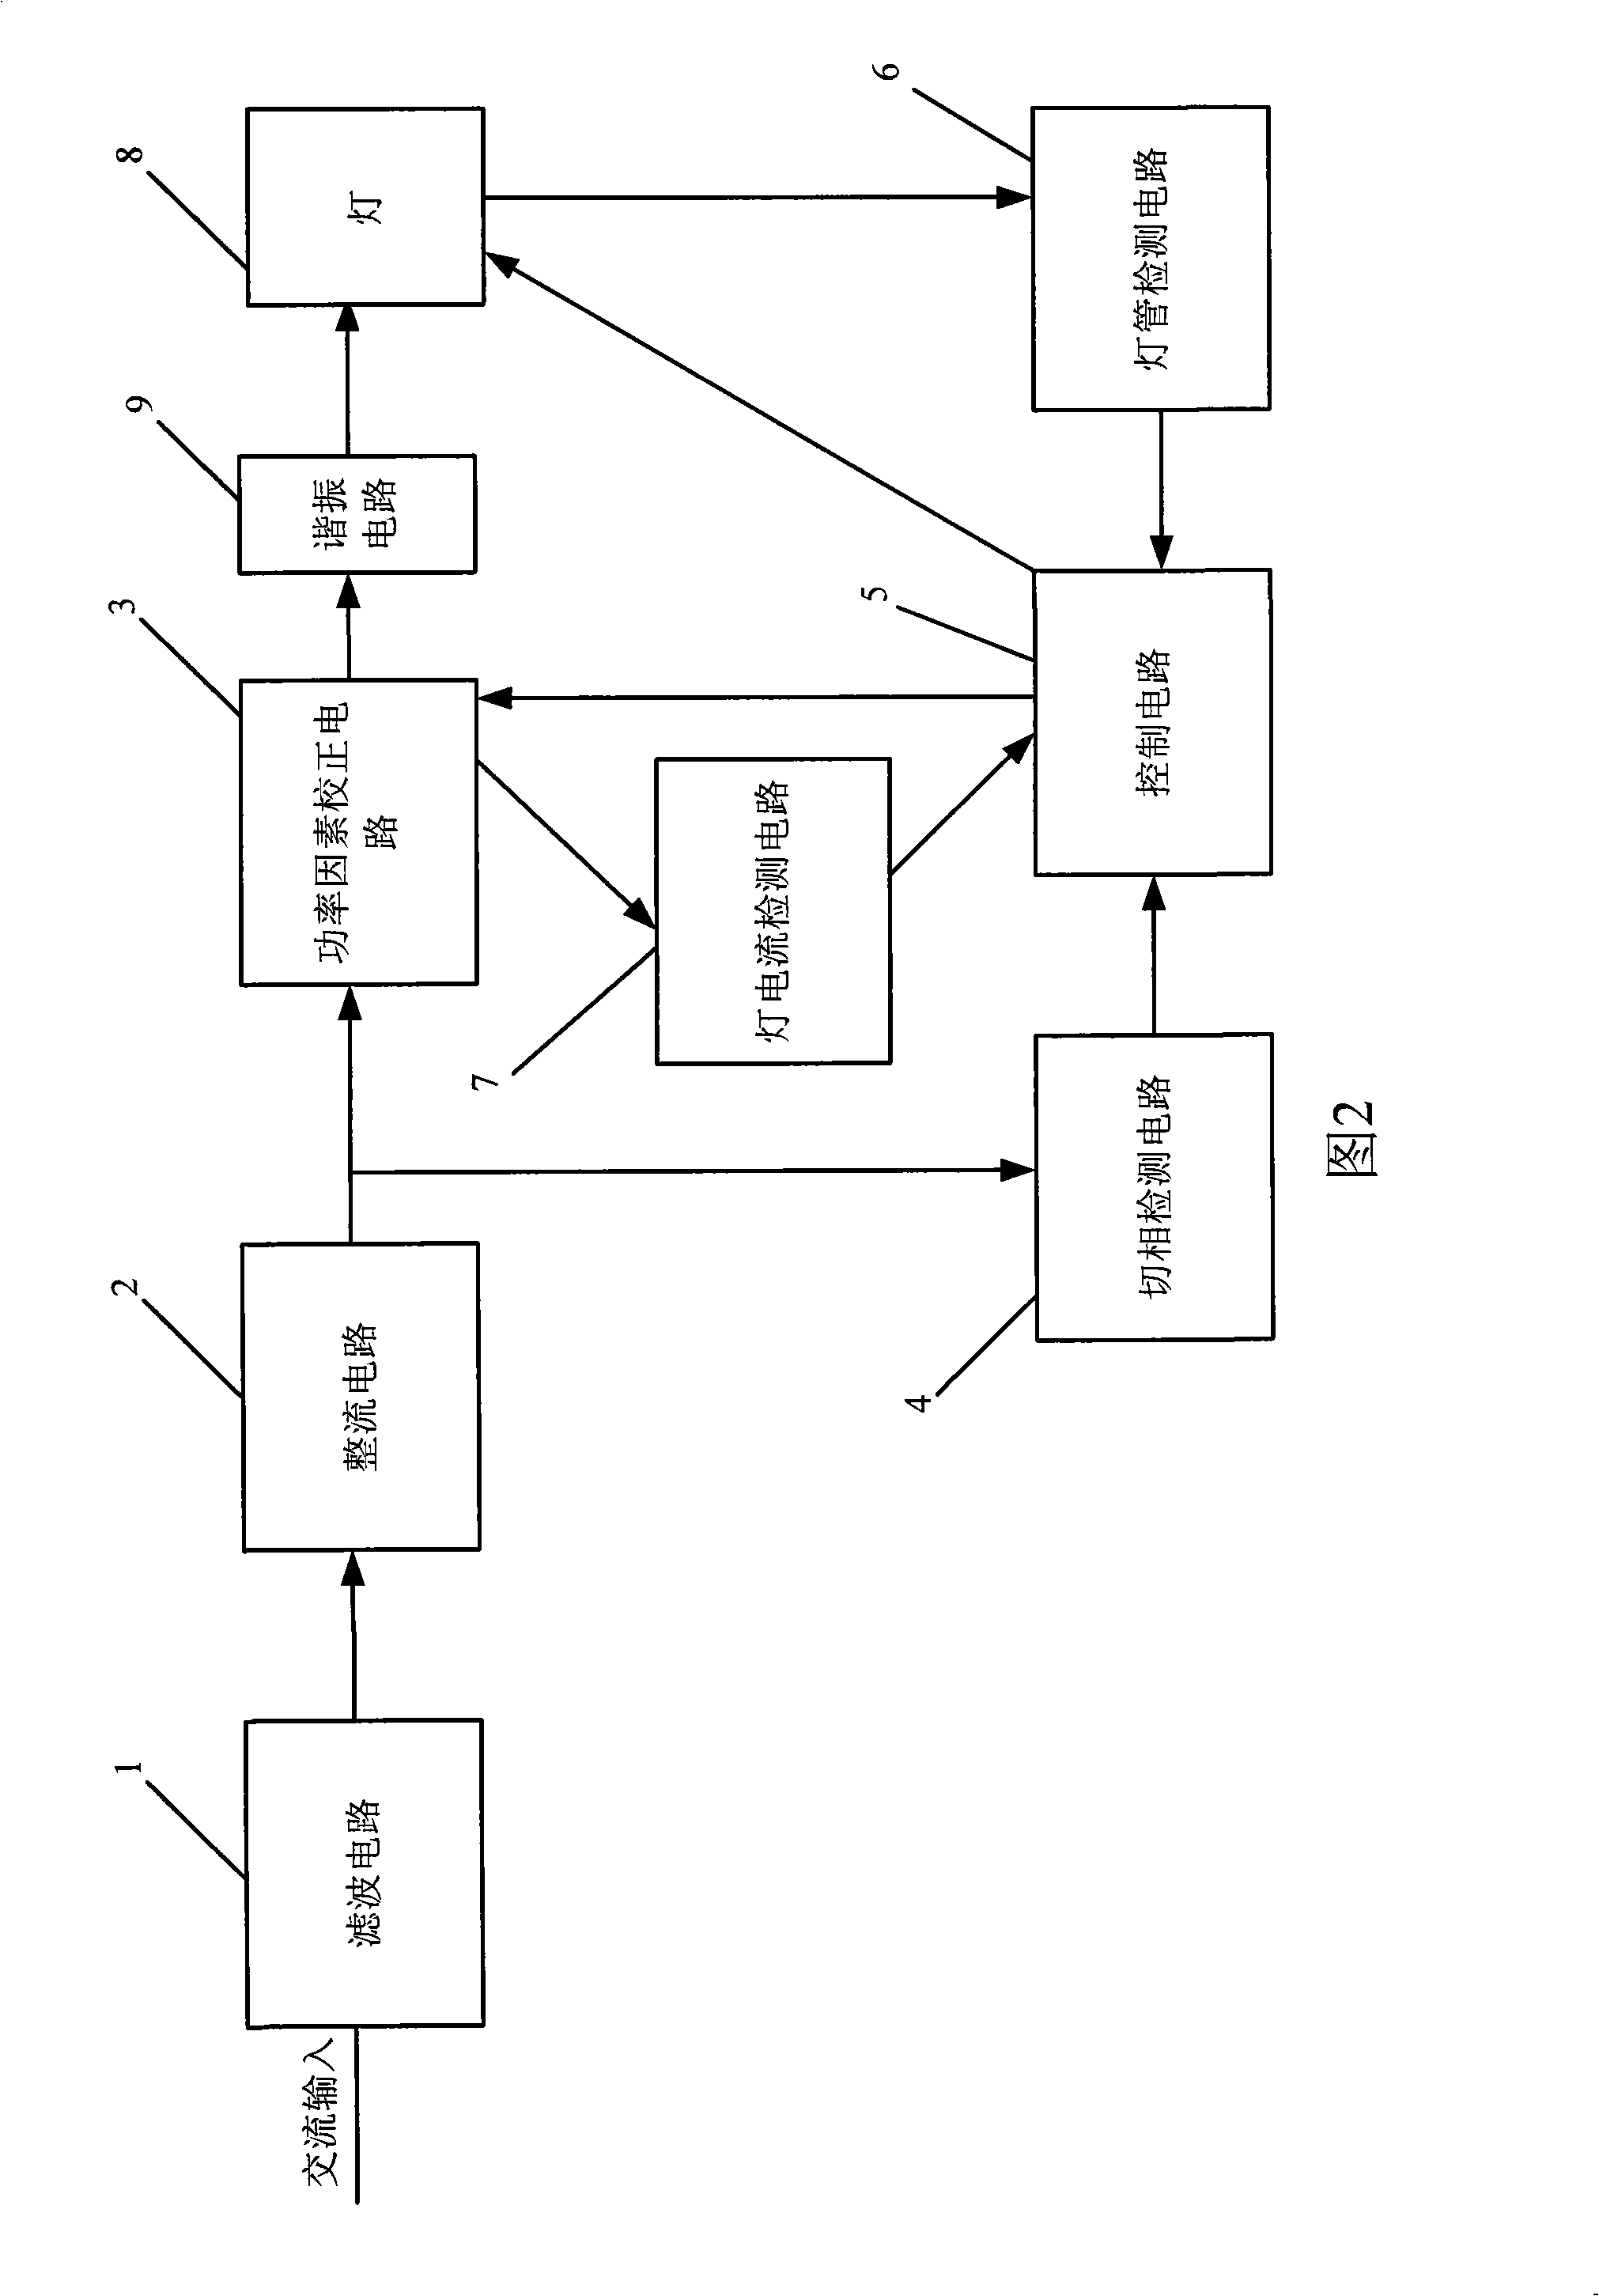 Electronic ballast and general lamp seat having the same